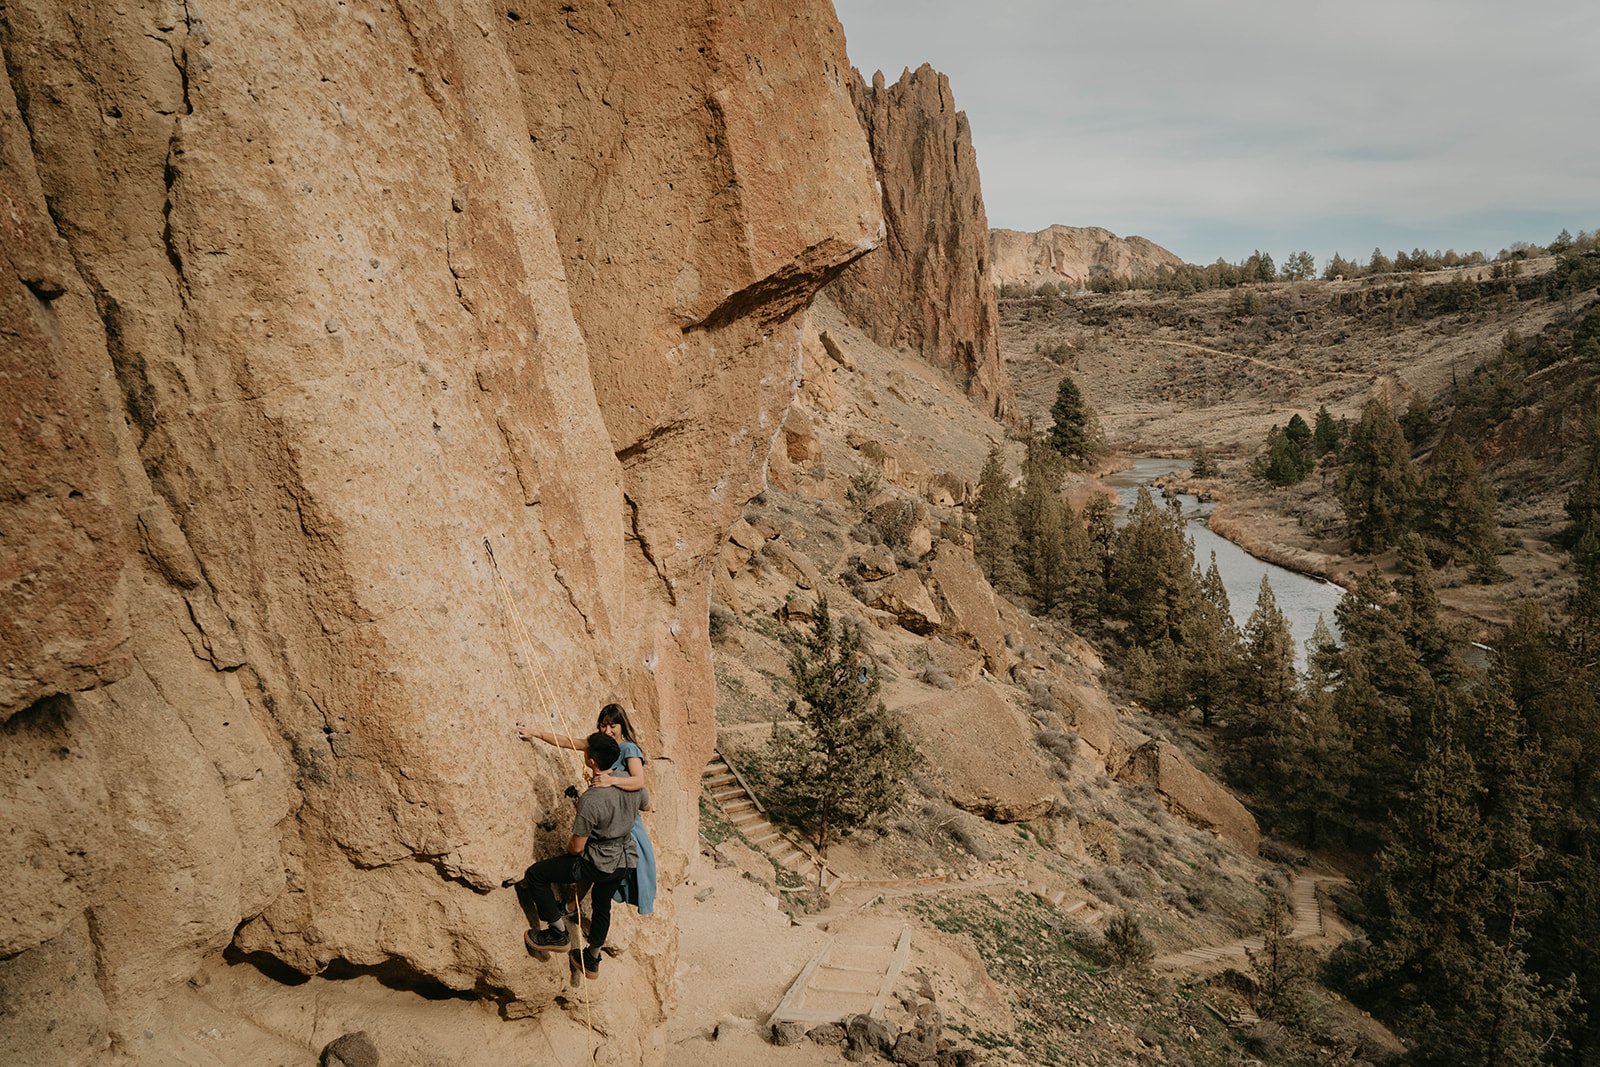 Couple rock climbing at Smith Rock for engagement session